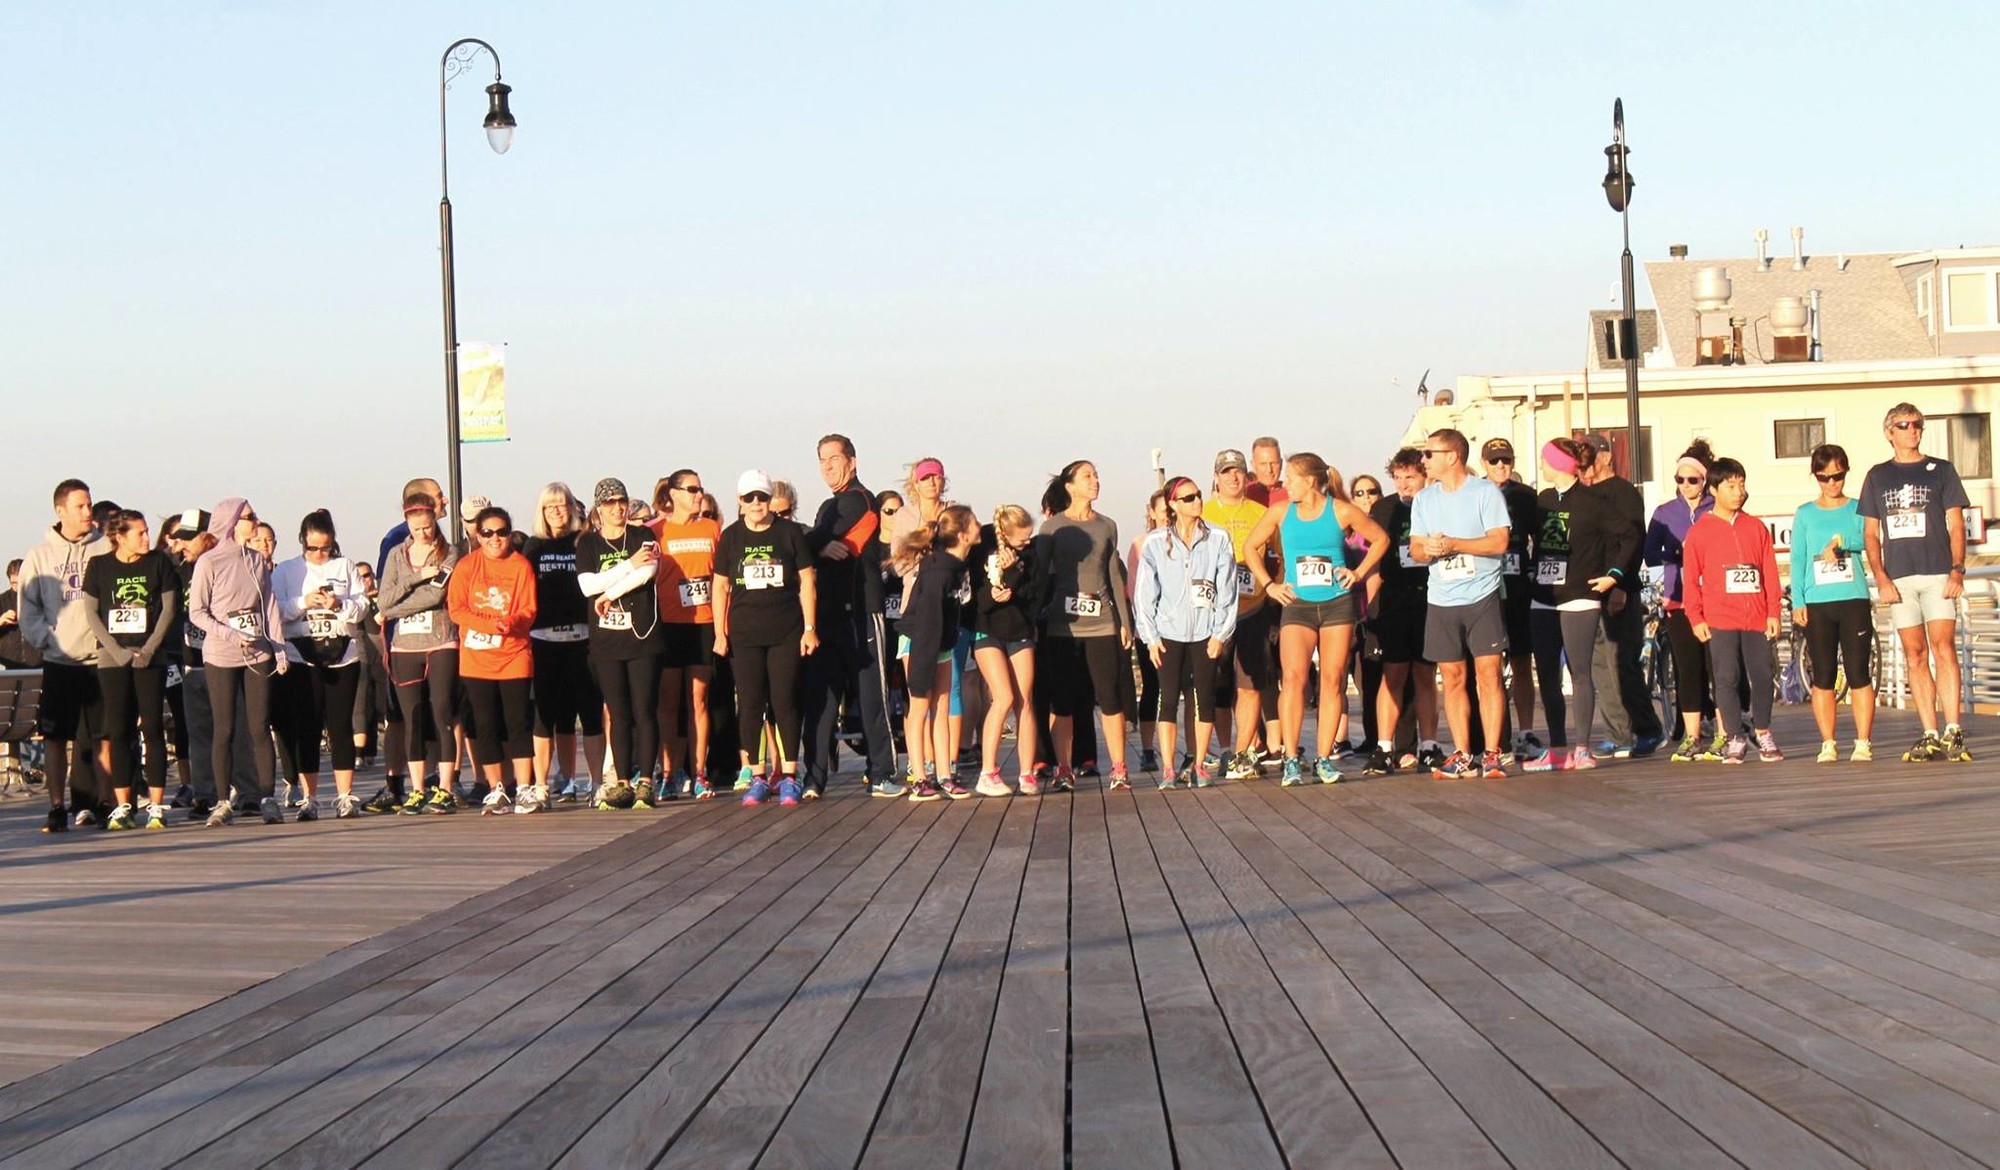 Two and a half years after Hurricane Sandy devastated the homes and lives of New York and New Jersey residents, Race2Rebuild’s next Run, Ride, Rebuild event will be held on Saturday, April 18, in Long Beach.